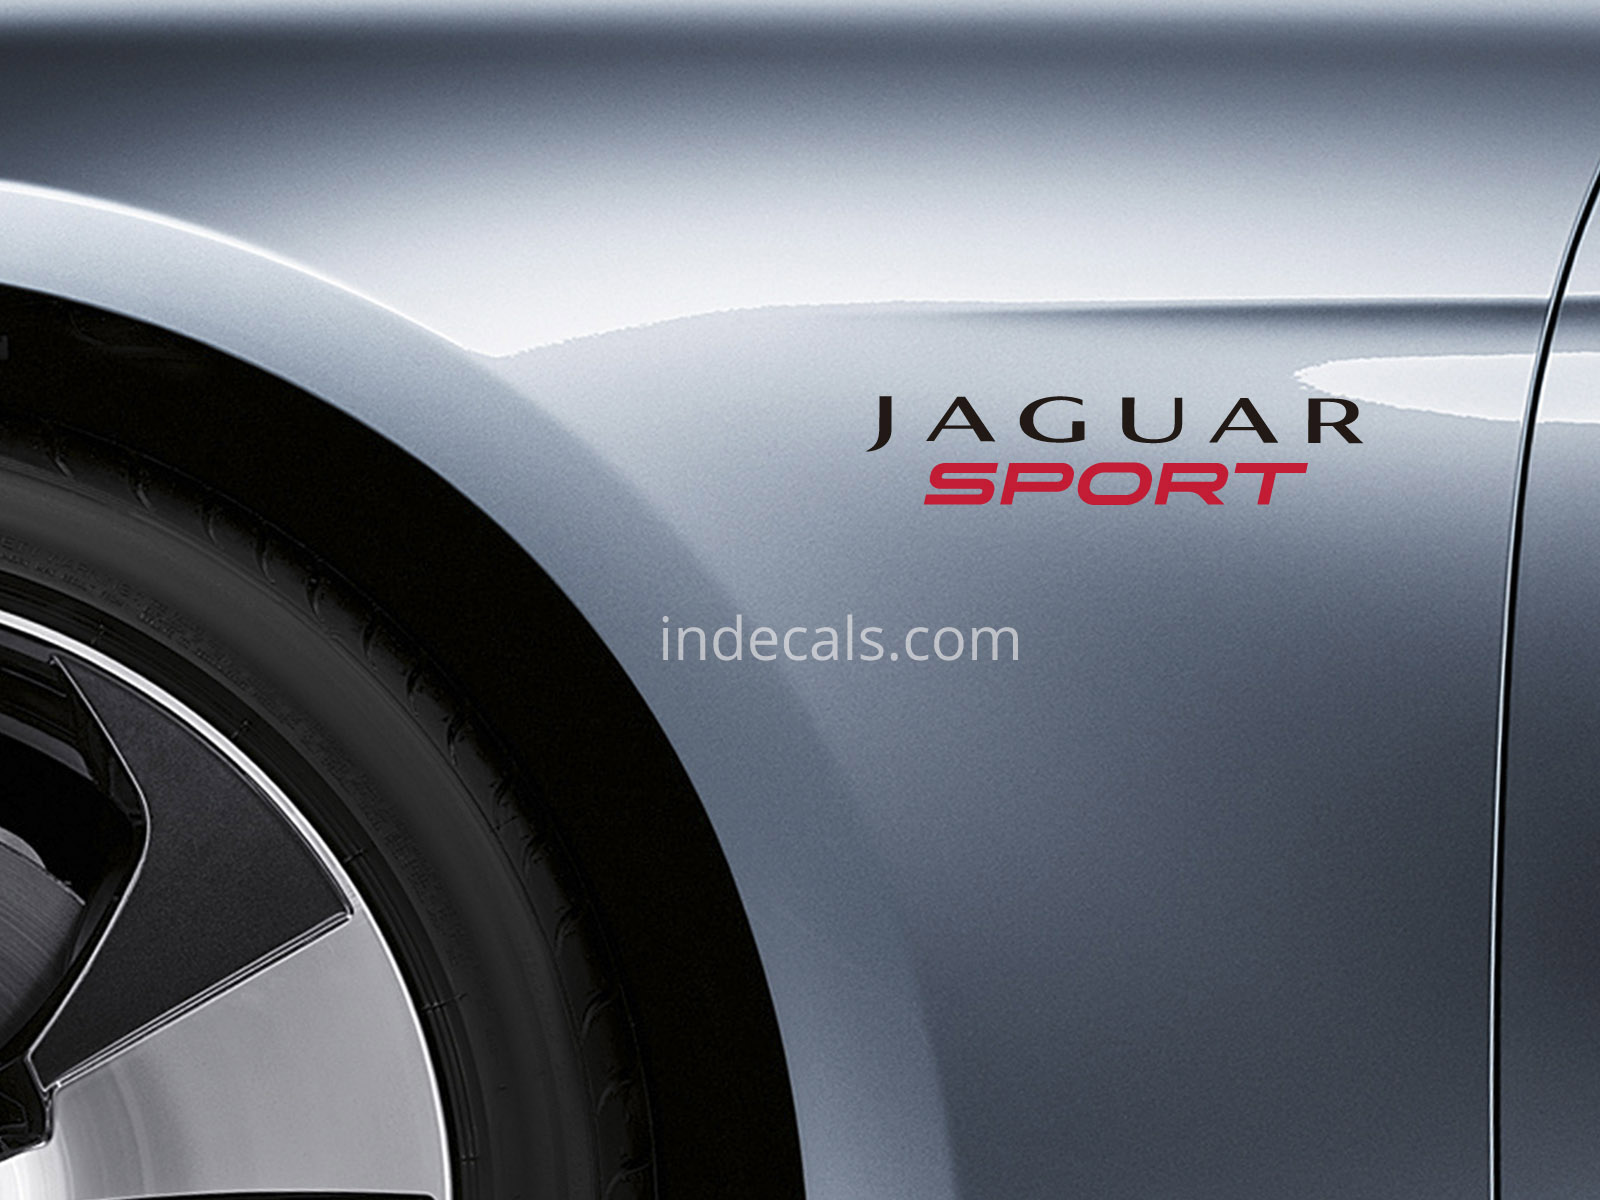 2 x Jaguar Sports stickers for Wings - Black & Red